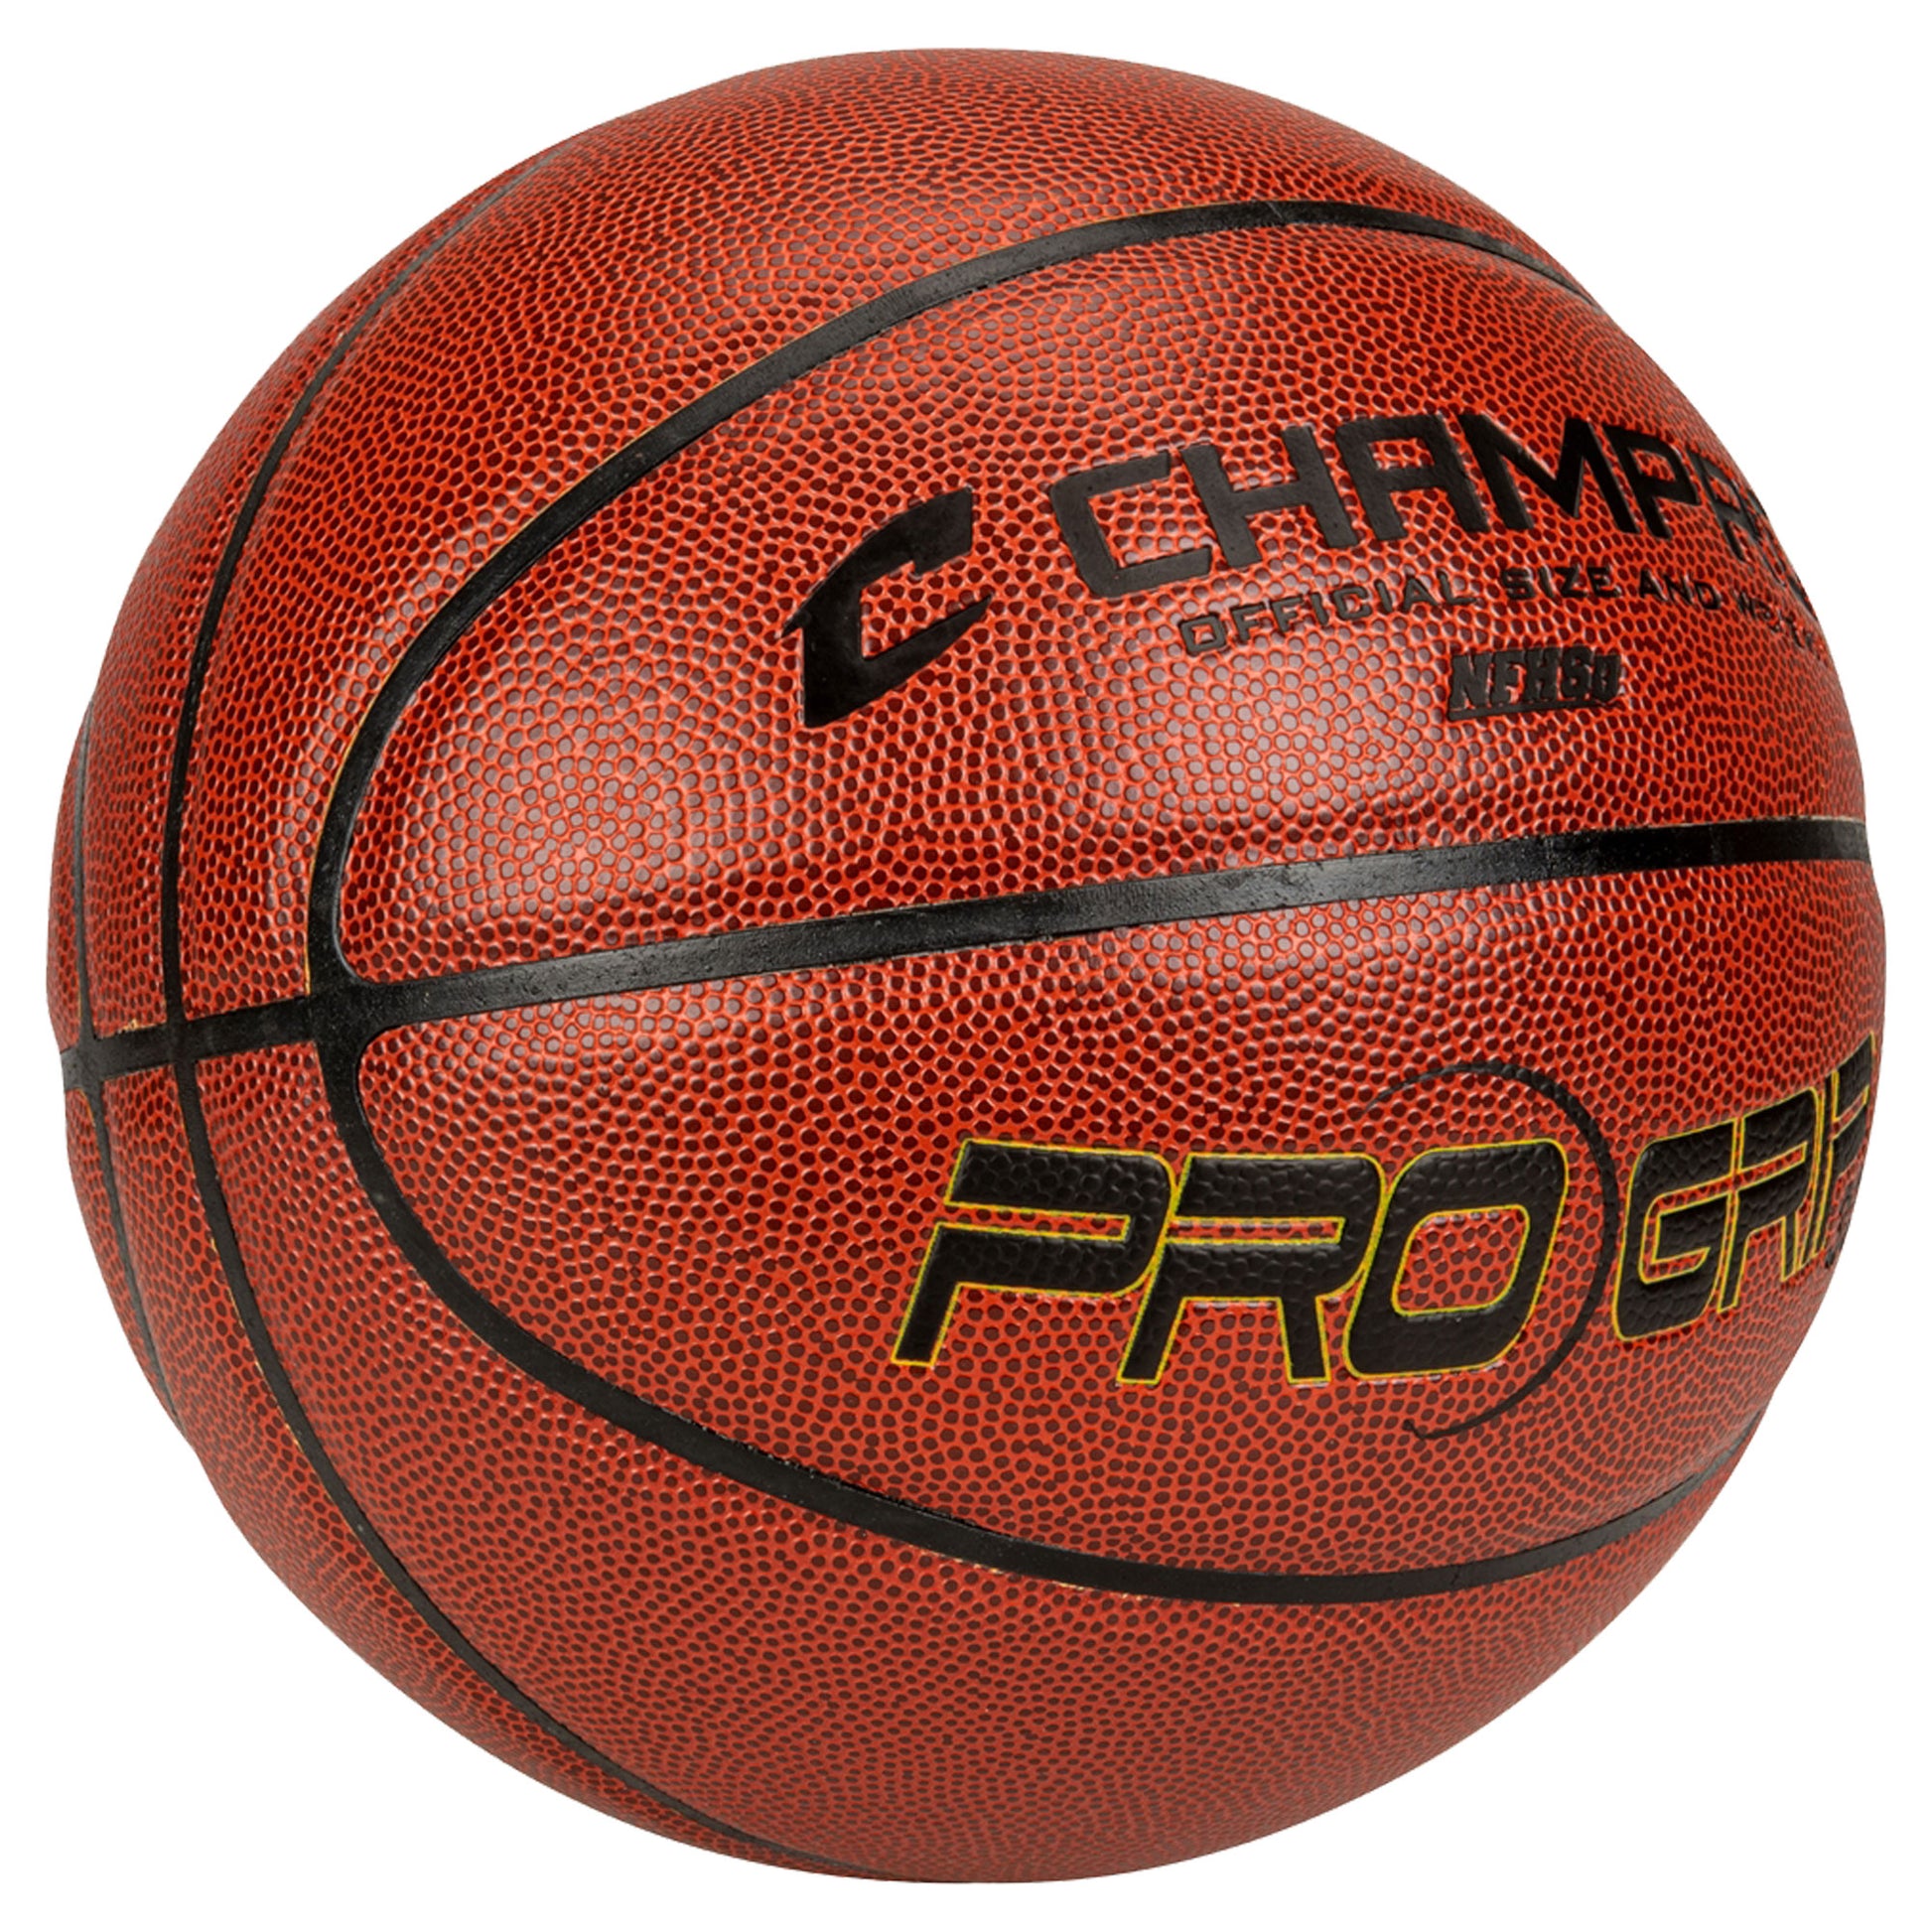 Champro Sports Progrip 3000 High Performance Indoor Composite Basketba –  Red's Team Sports